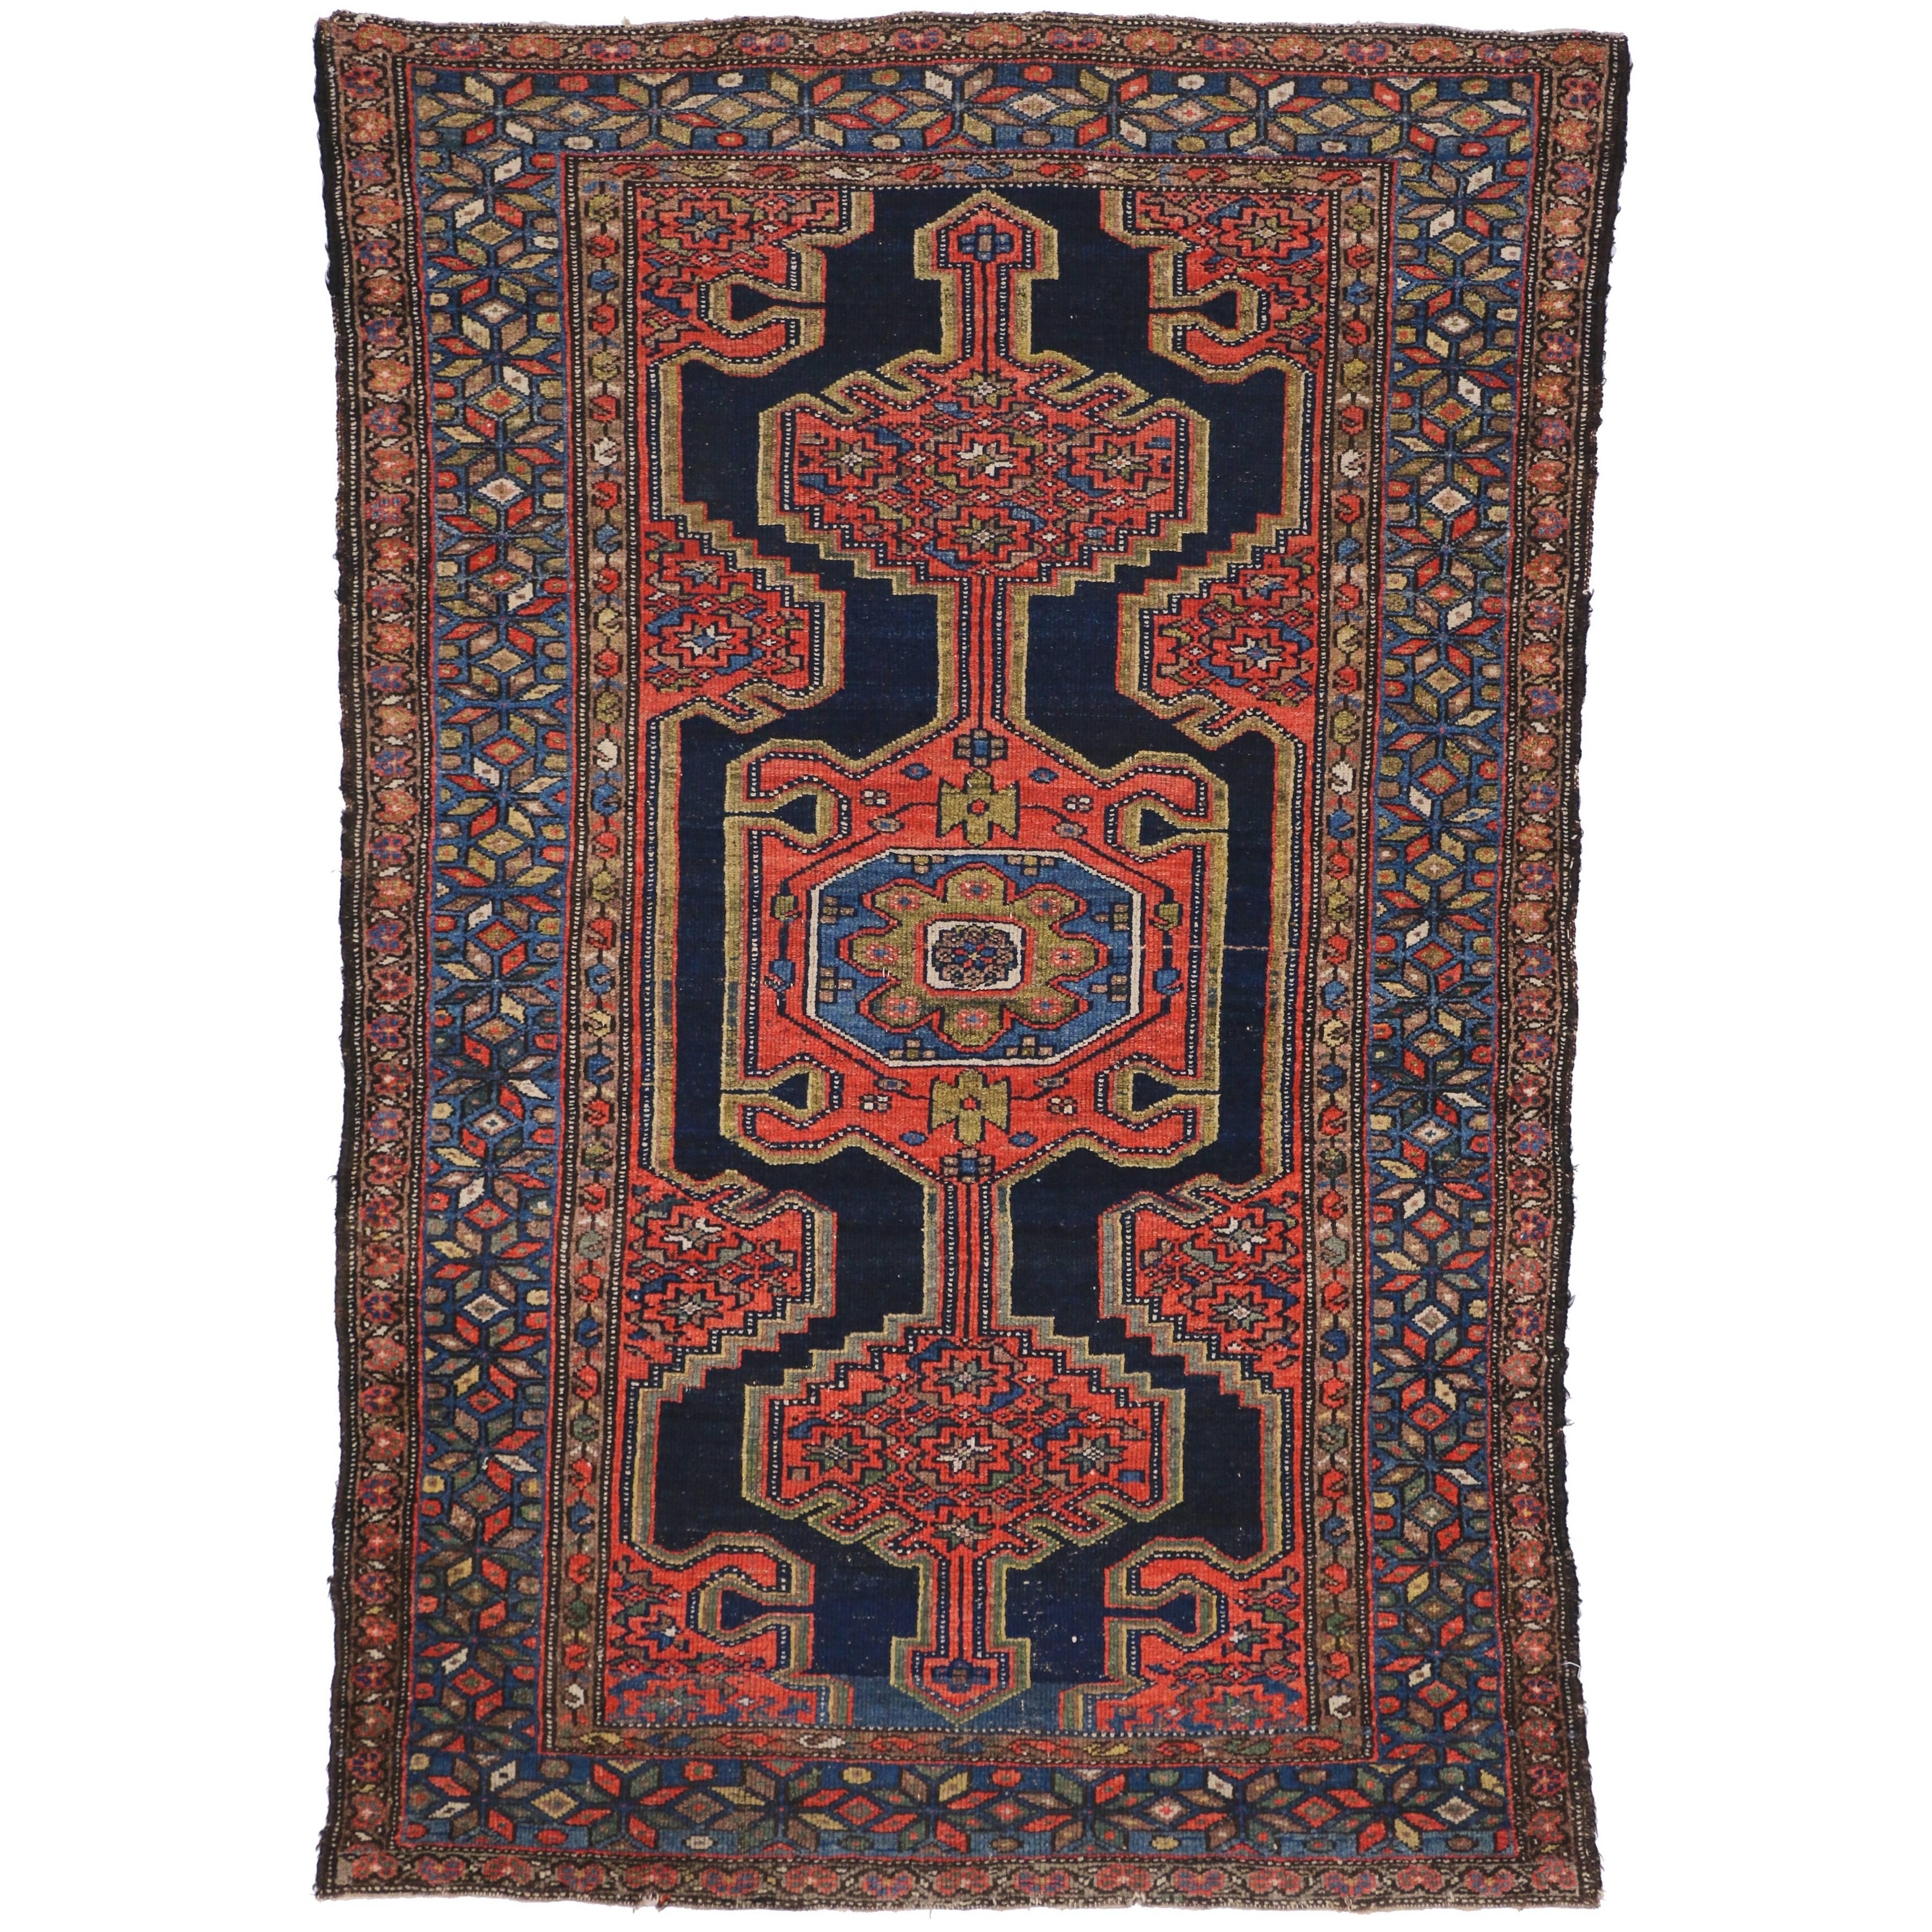 Antique Persian Hamadan Rug with Modern Tribal Style